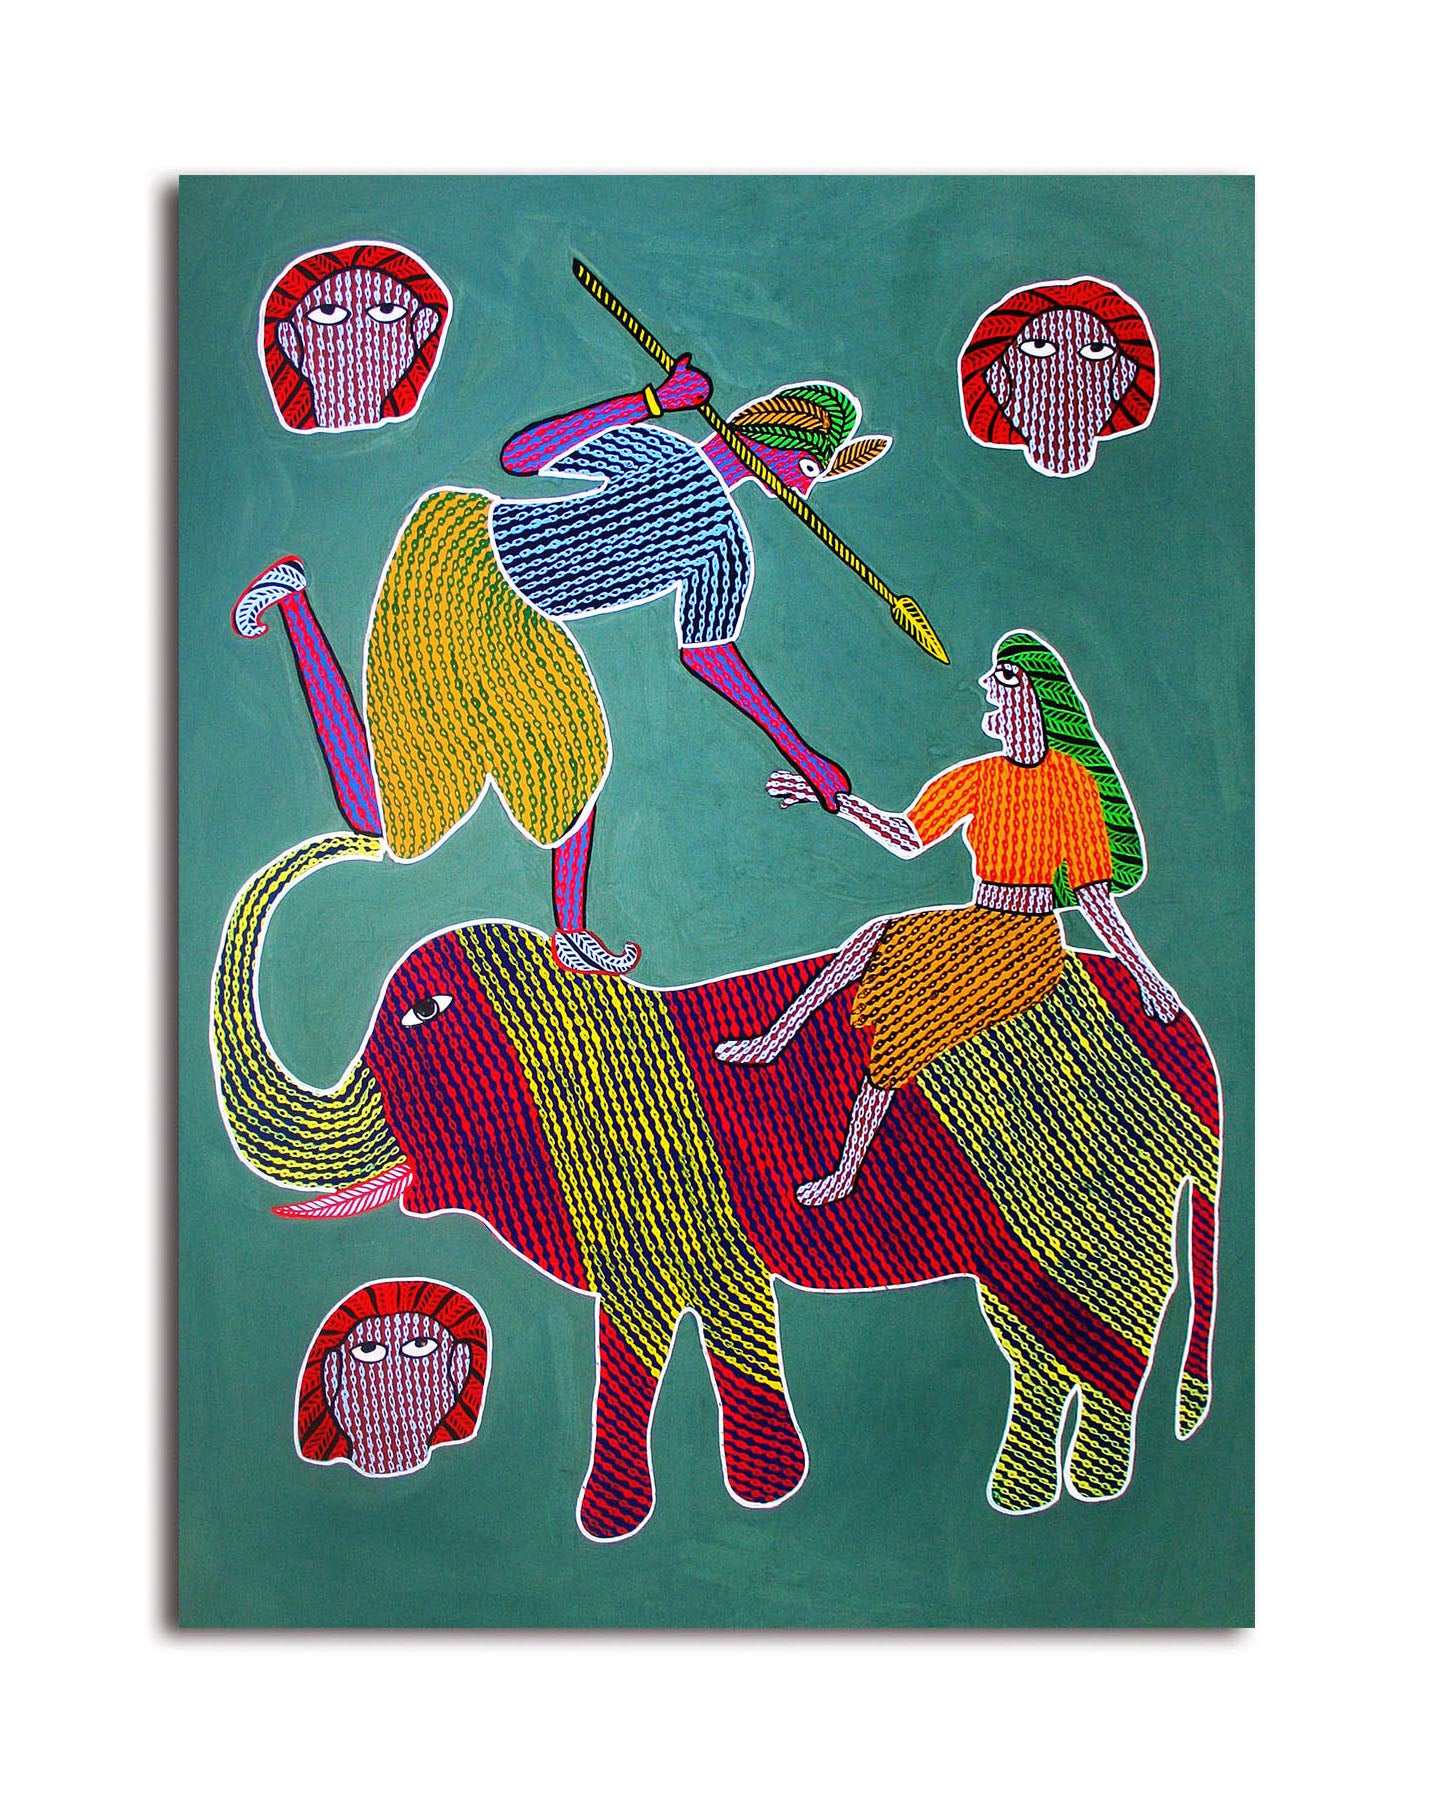 Playing On Elephant - Unframed Canvas Painting